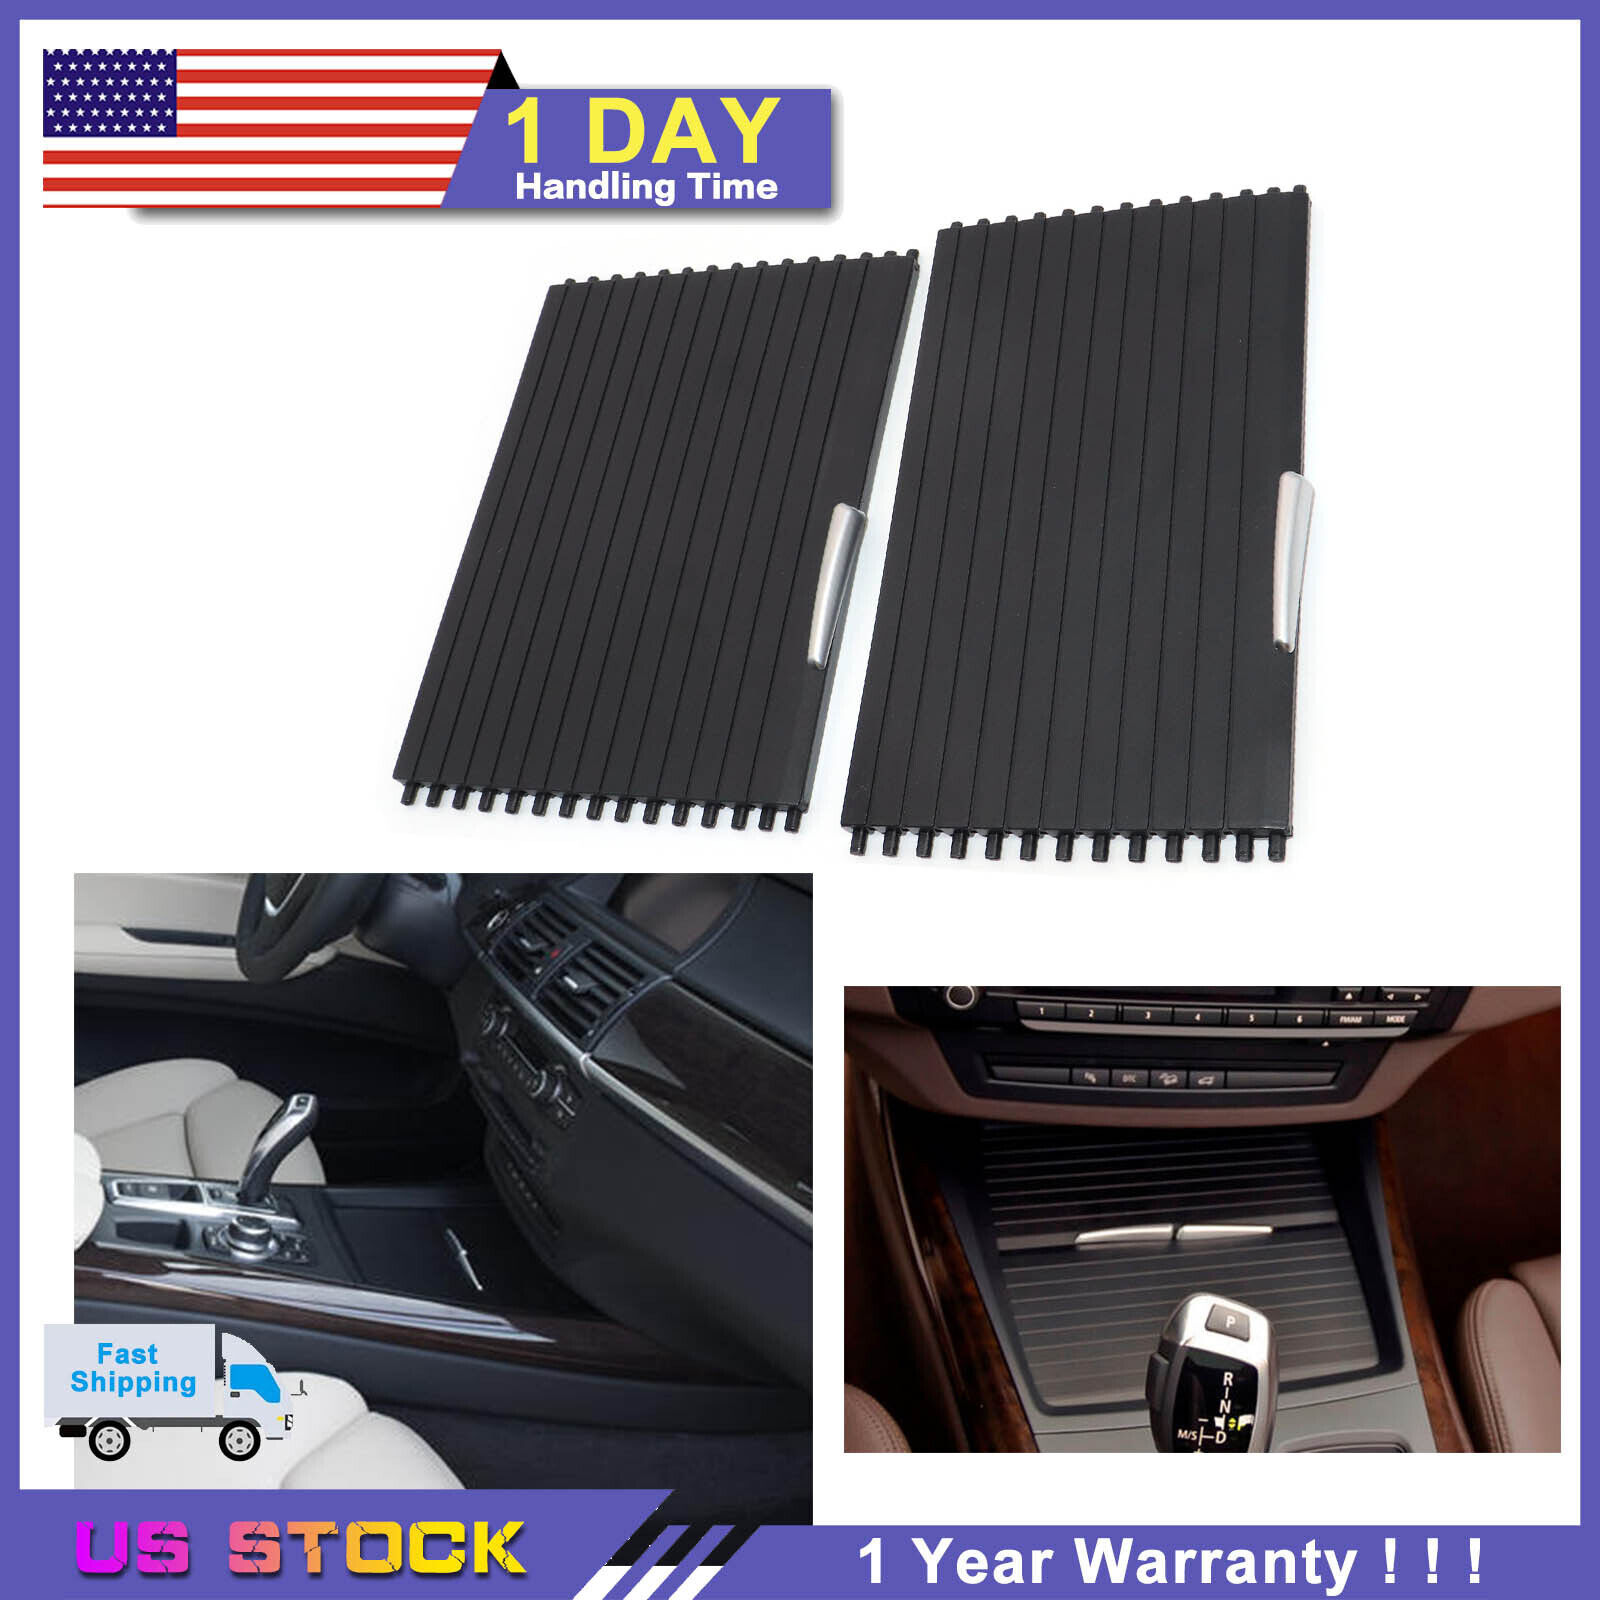 Front Console Cup Holder Roller Blind Cover Kit For BMW X5 X6 E70 E71 2007-2014